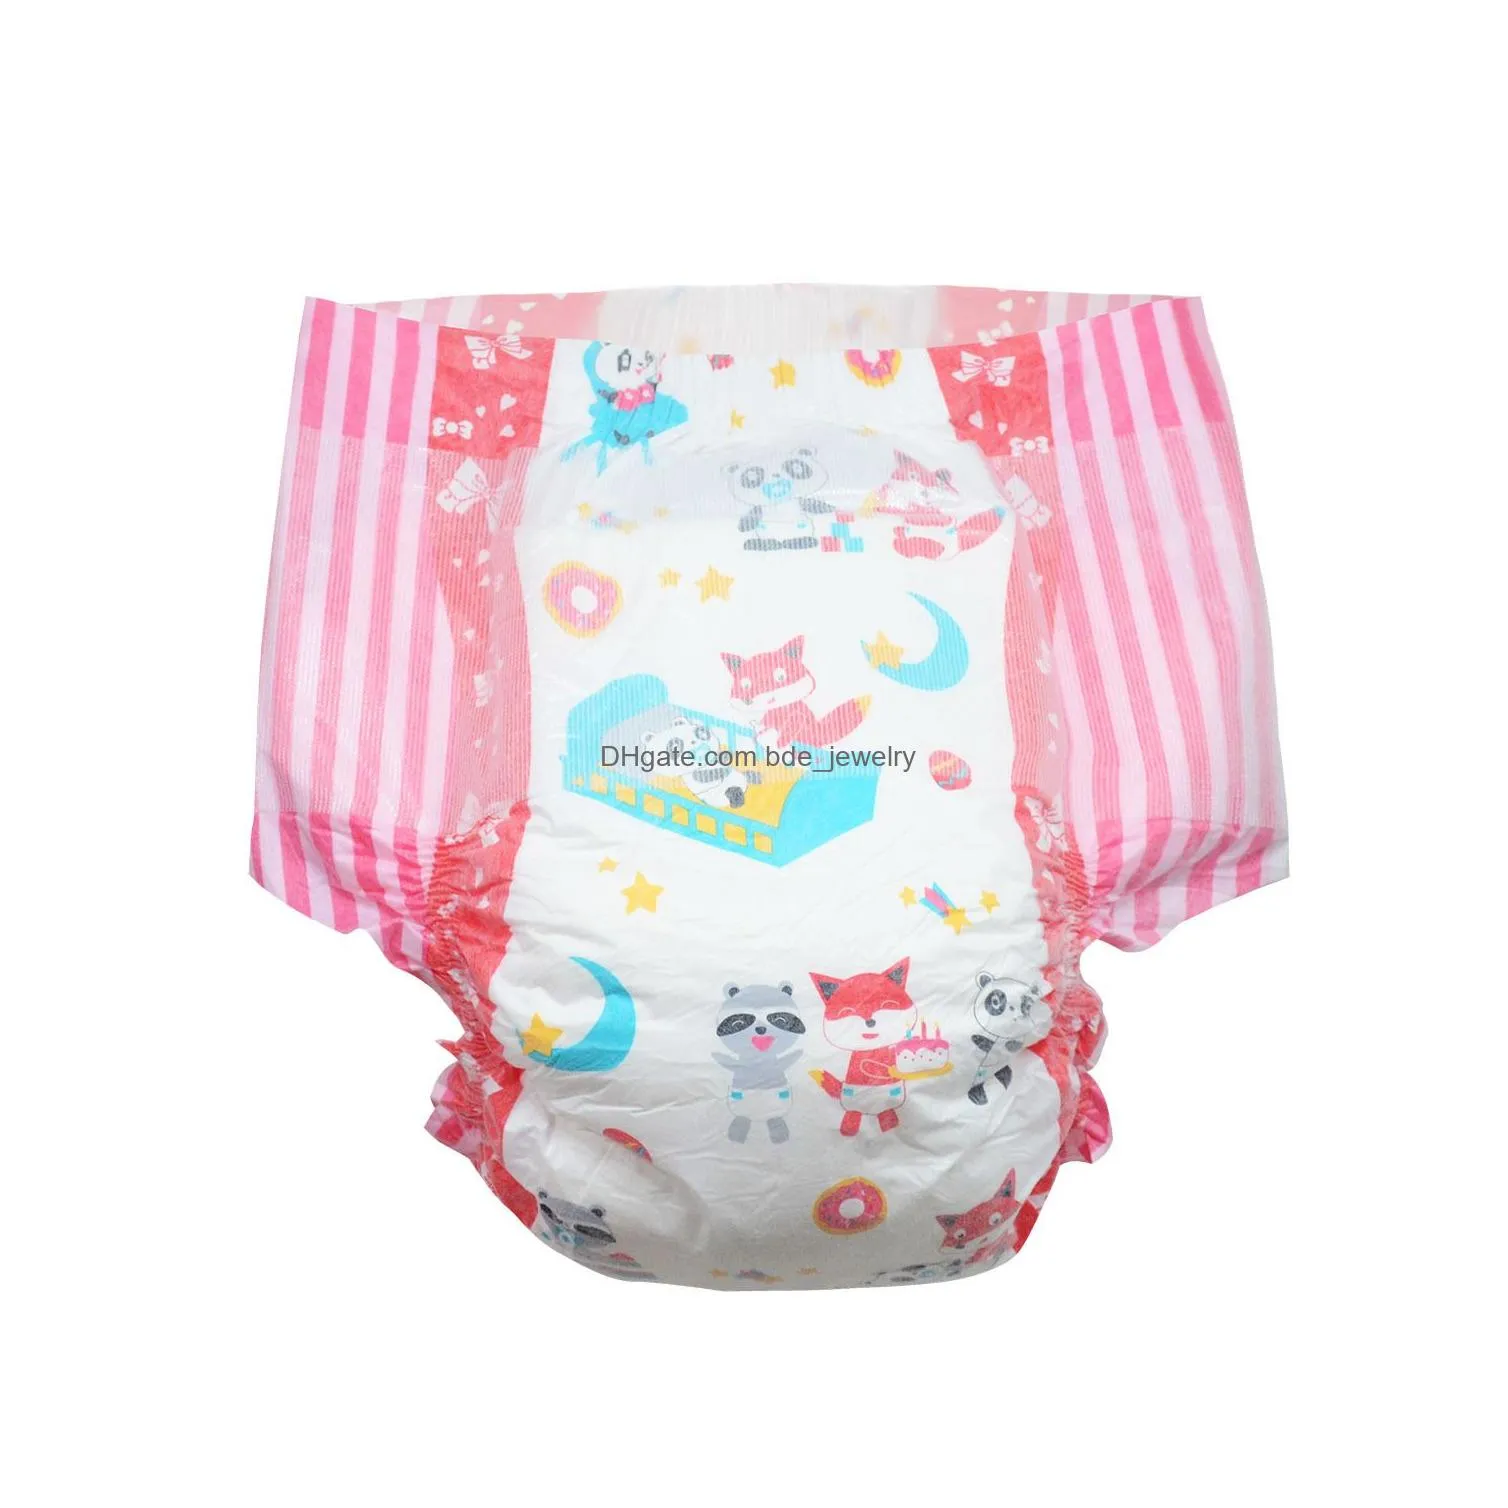 cloth diapers 1pcs abdl adult baby onesize big waist red printing ddlg disposable diapers lover bebe dad dummy dom 220927